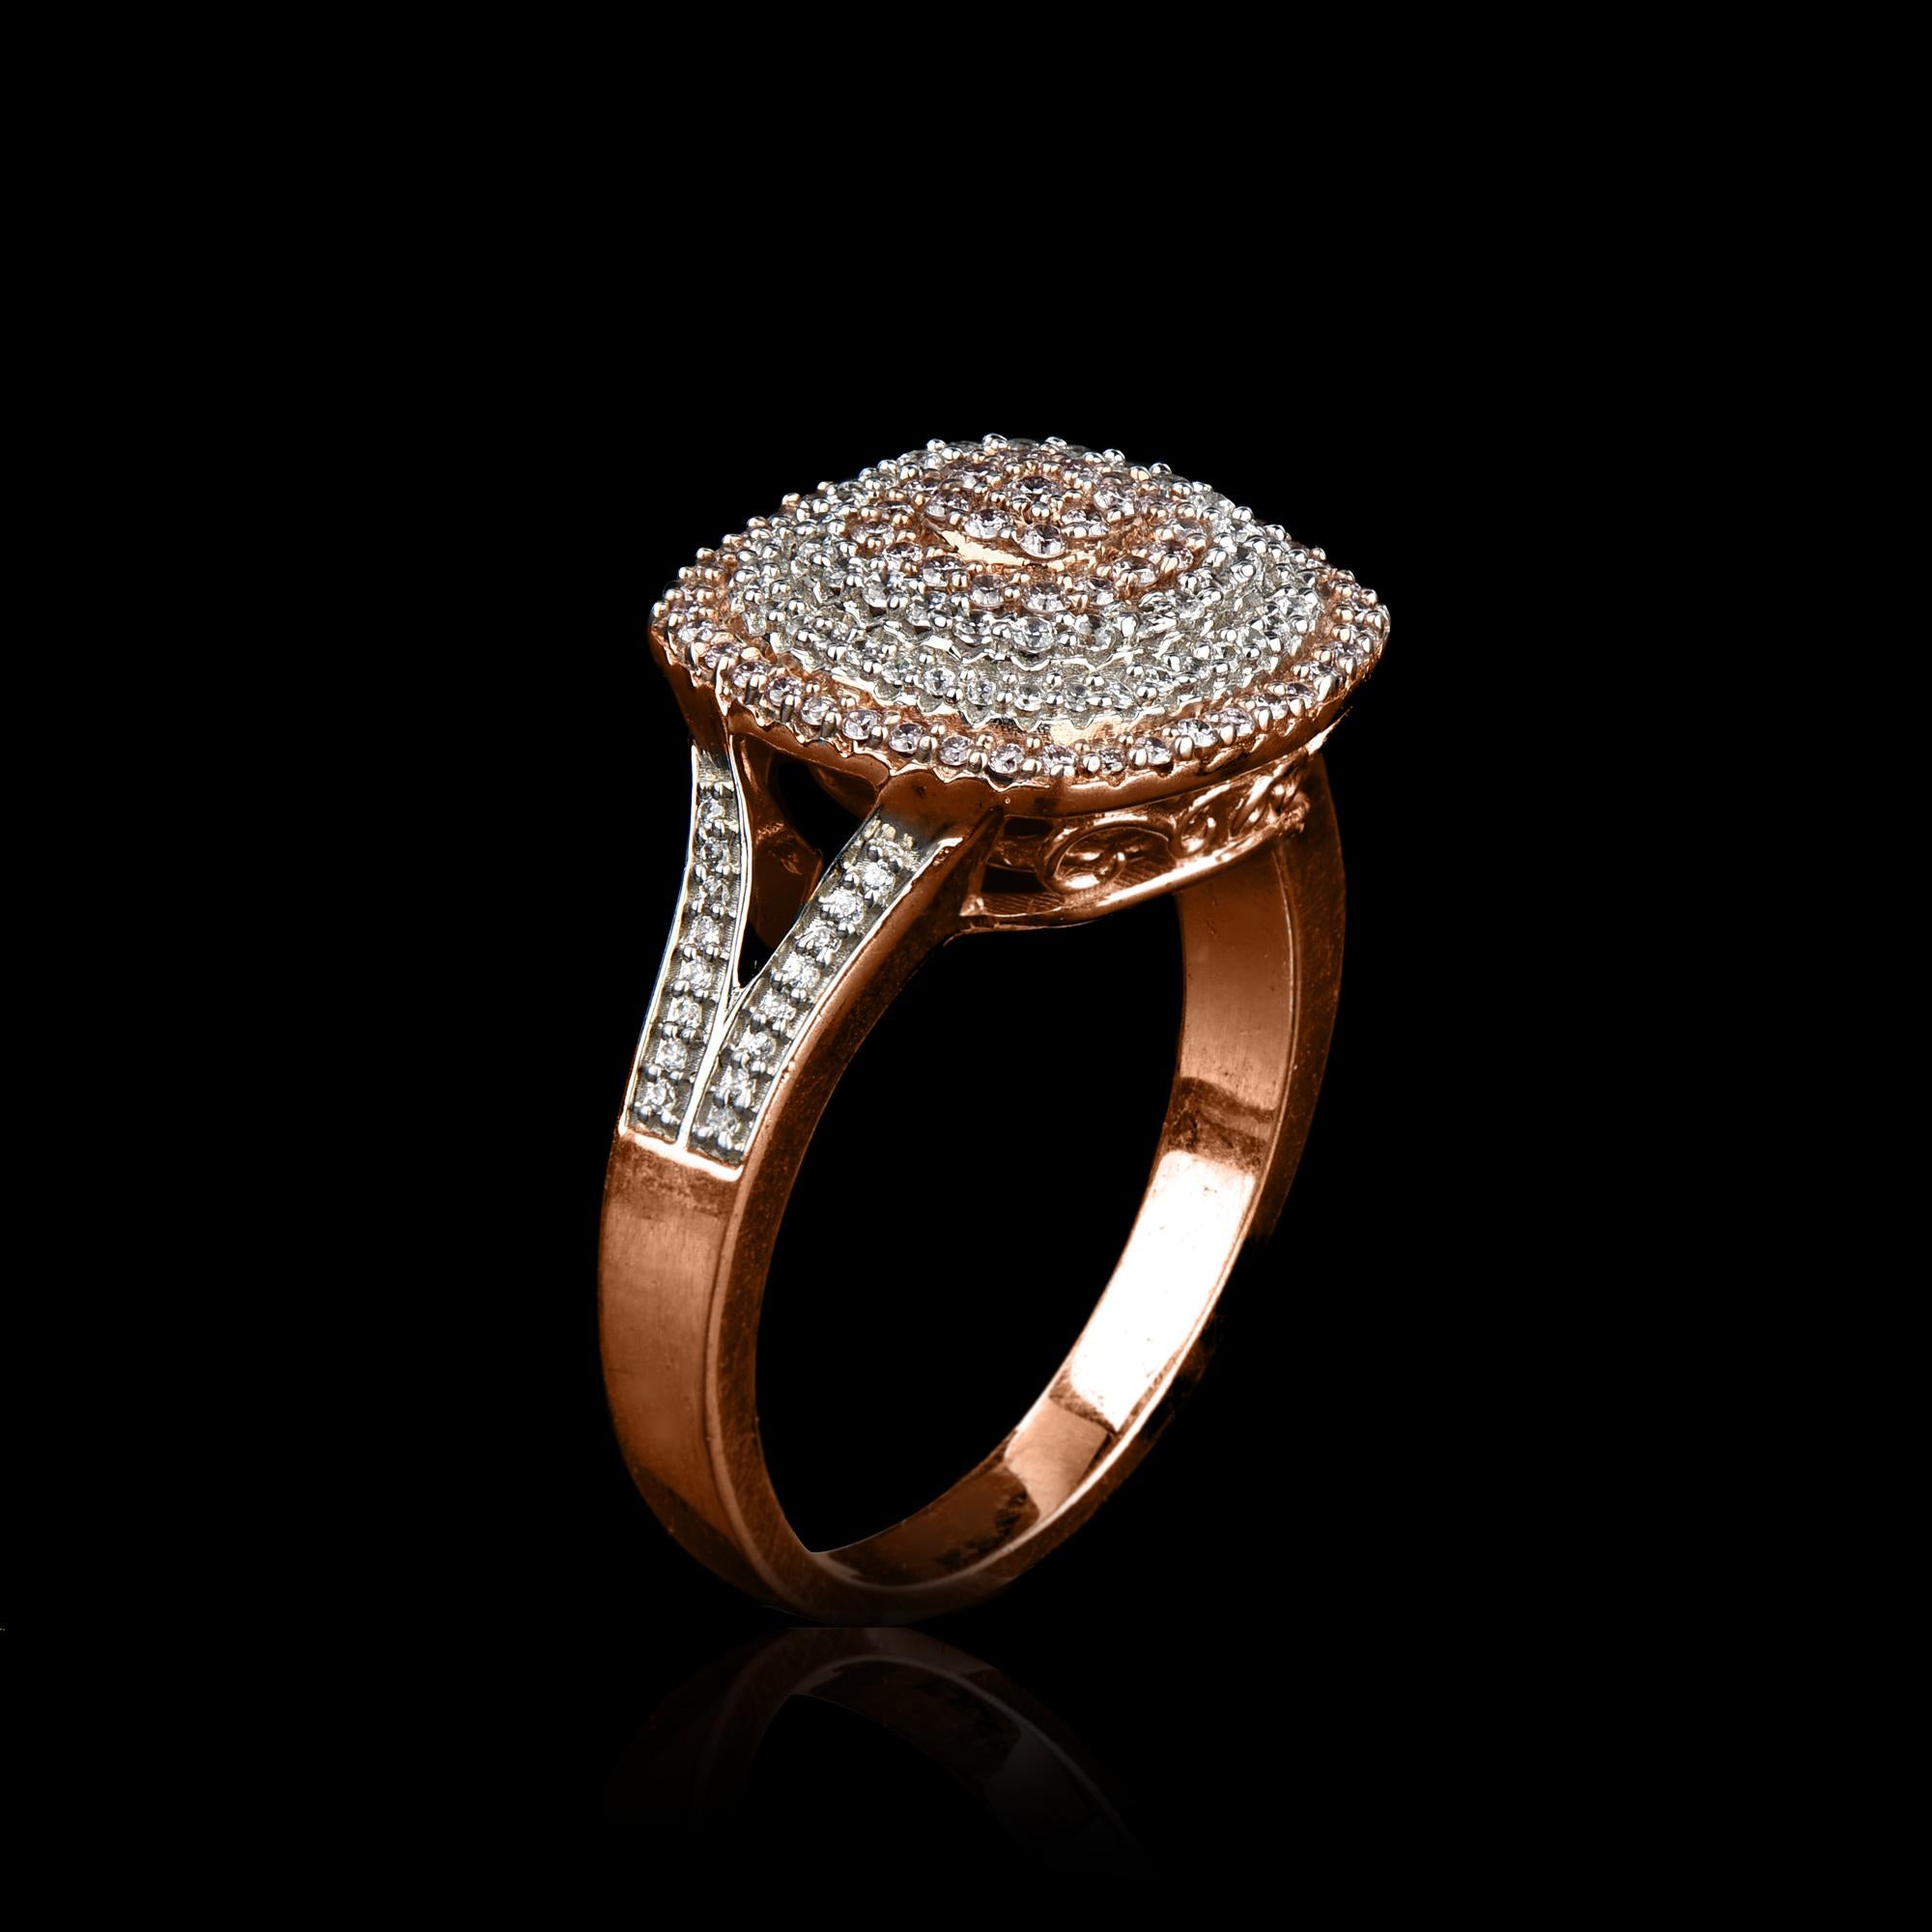 This dramatic design ring in 14K rose gold showcases 0.50 carats of sparkling 90 round and 65 natural pink rosé diamonds set in pave and micro prong setting, The diamonds are natural, not-treated and conflict-free with H-I color I1 clarity.